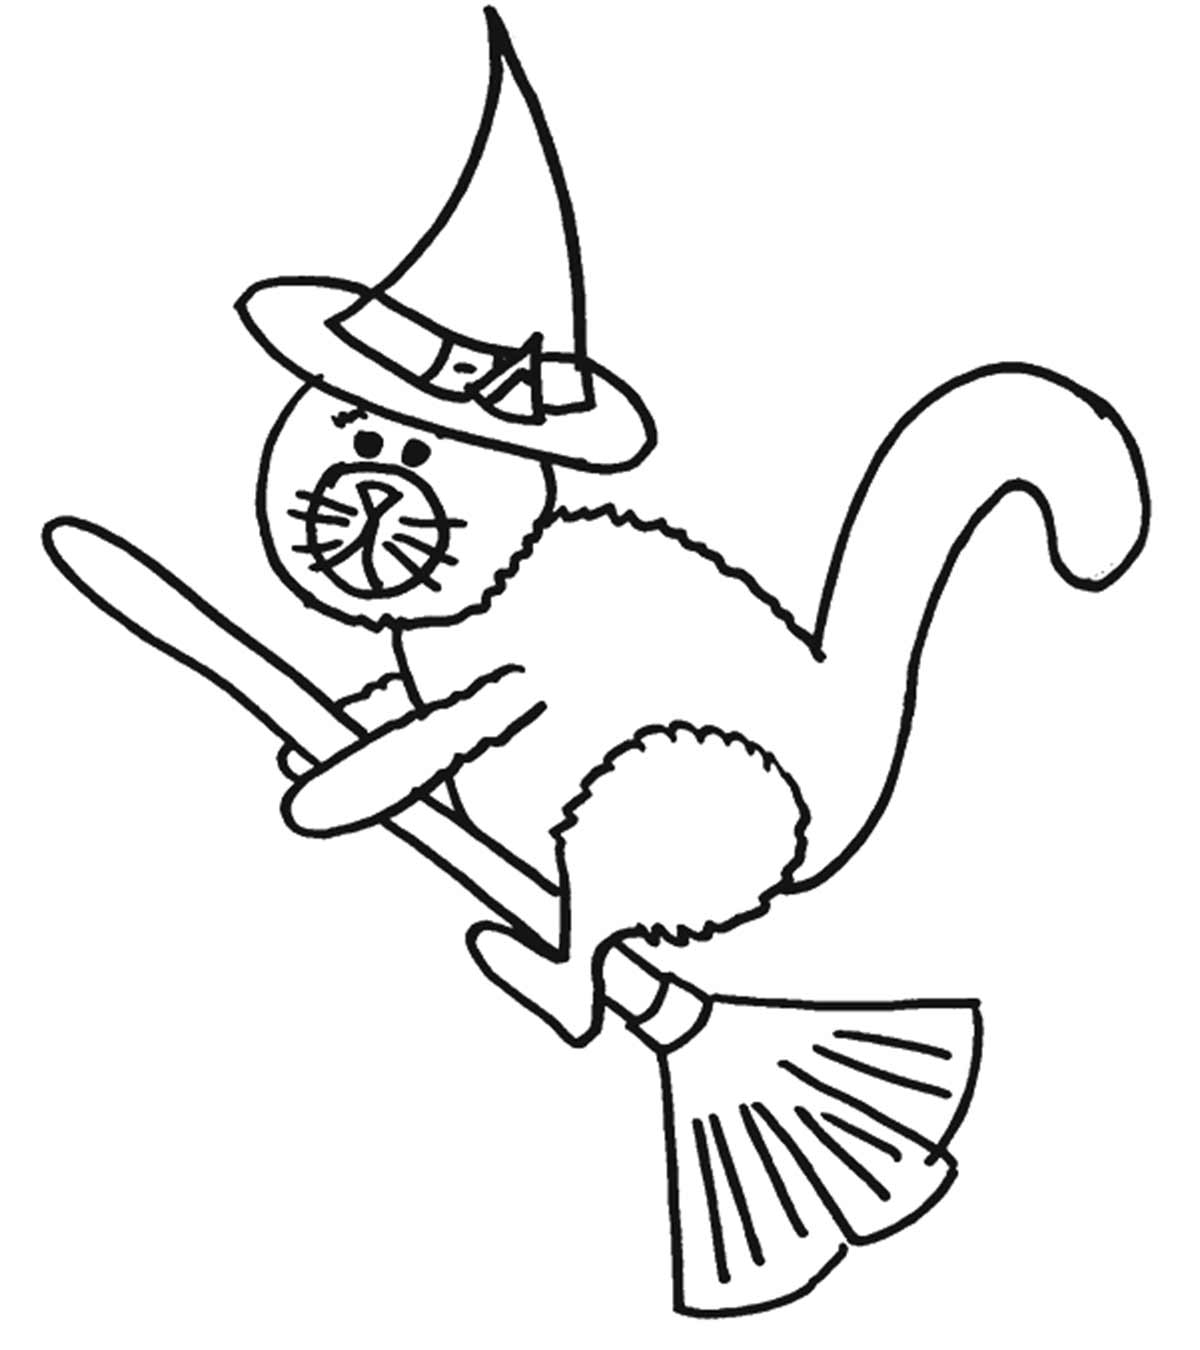 Halloween Coloring Pages - Free Printables - MomJunction